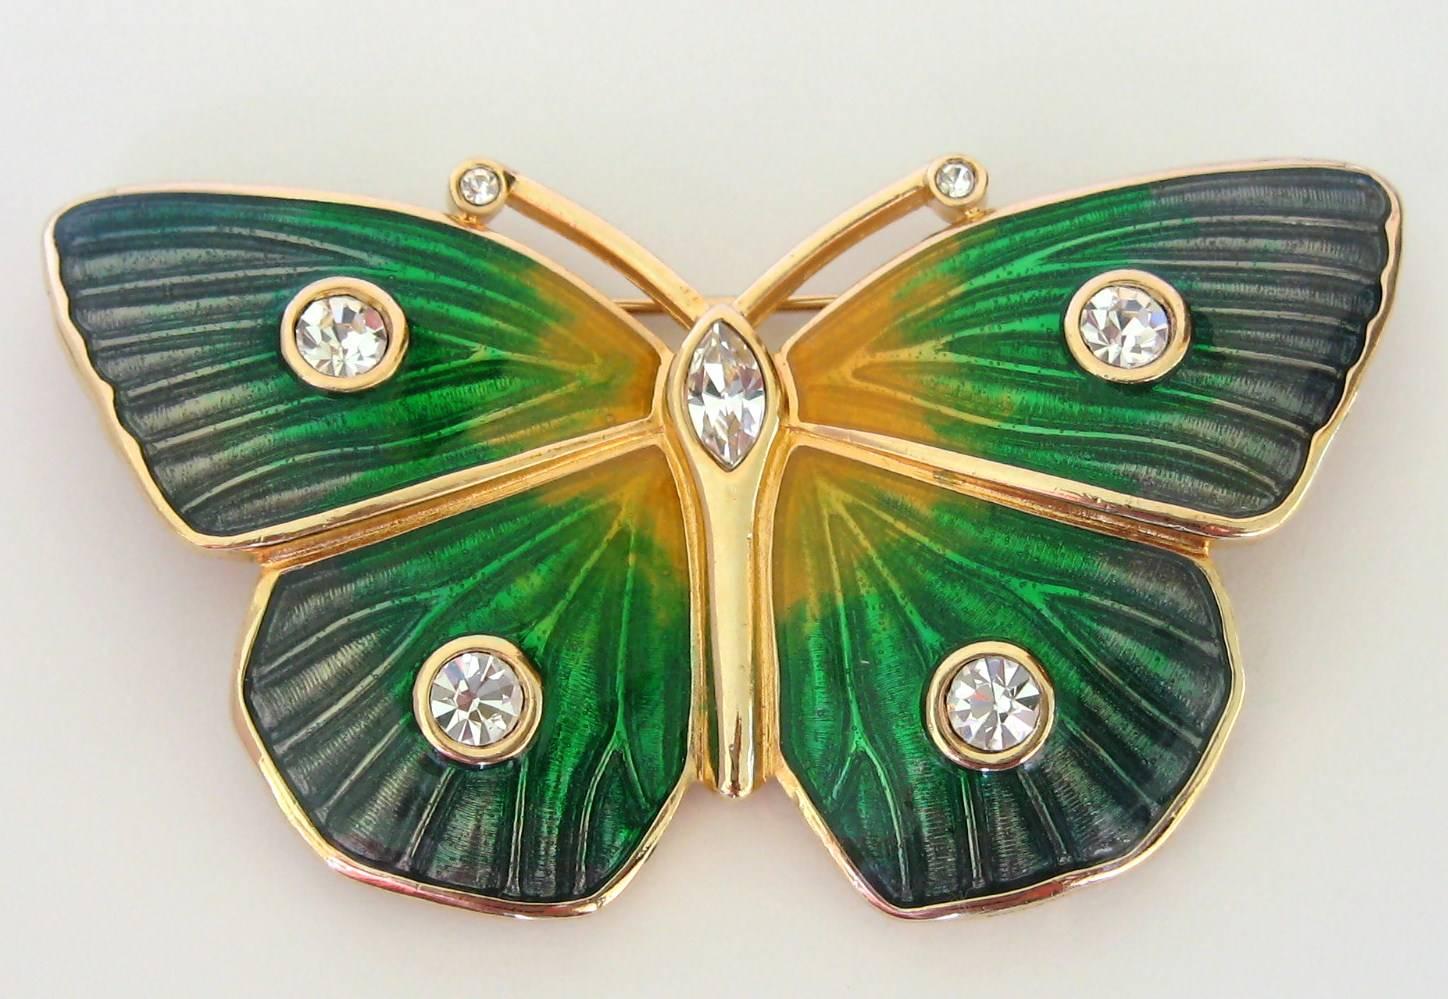 Stunning green enamel Butterfly pin made by Swarovski. 5 bezel set Crystals on the body. 2 Bezel set crystals on the antenna of this lovely Butterfly  
Measuring 2.89 in wide x 1.60 in . This is out of a massive collection of Hopi, Zuni, Navajo,